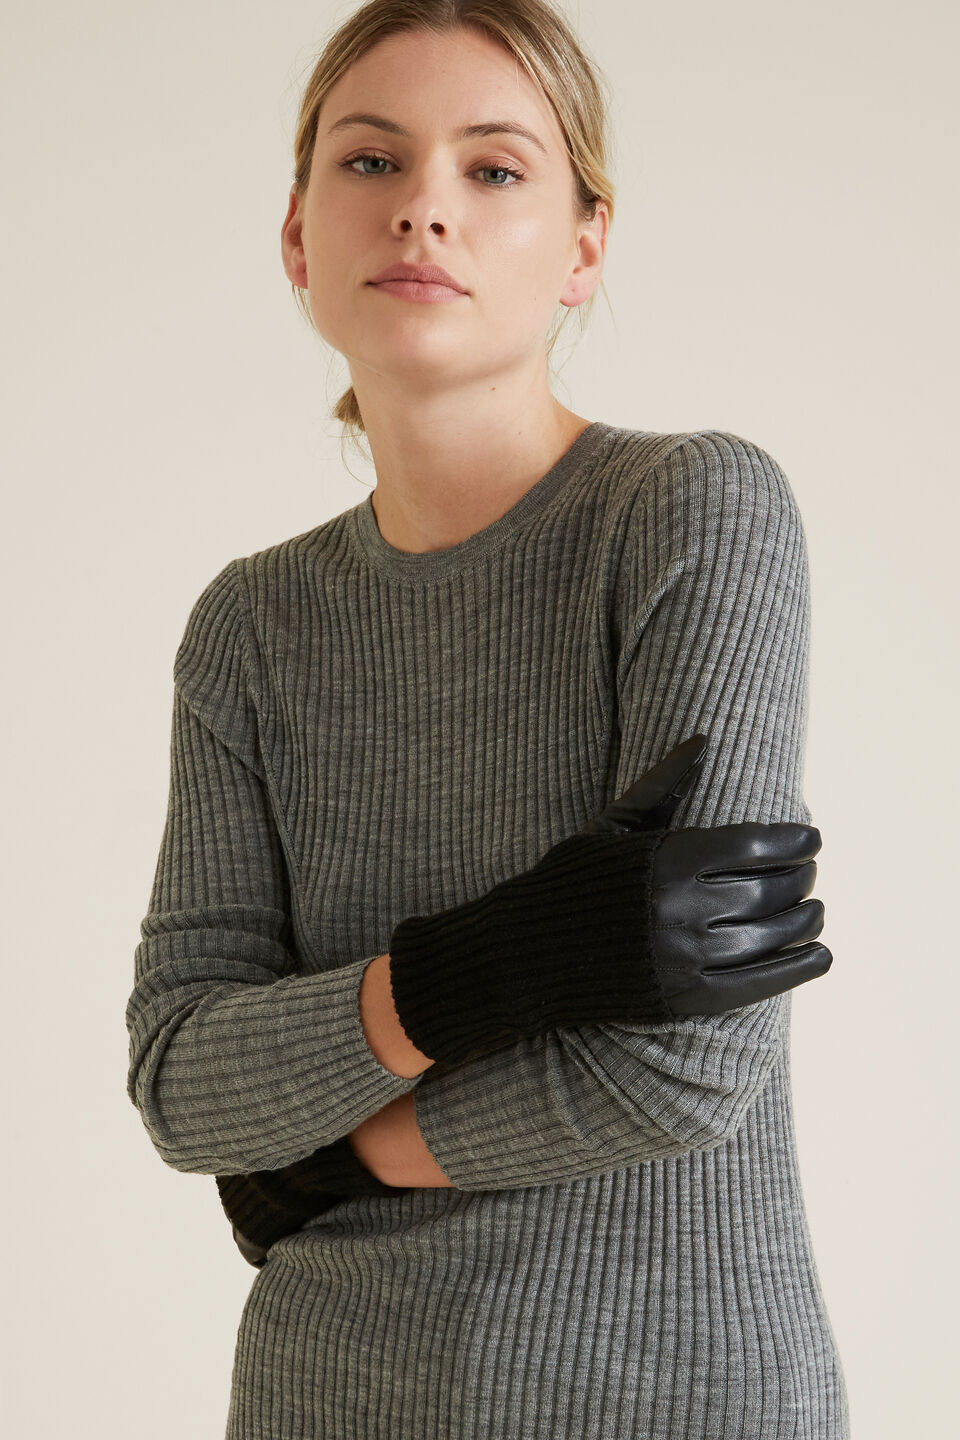 Leather Knit Gloves  